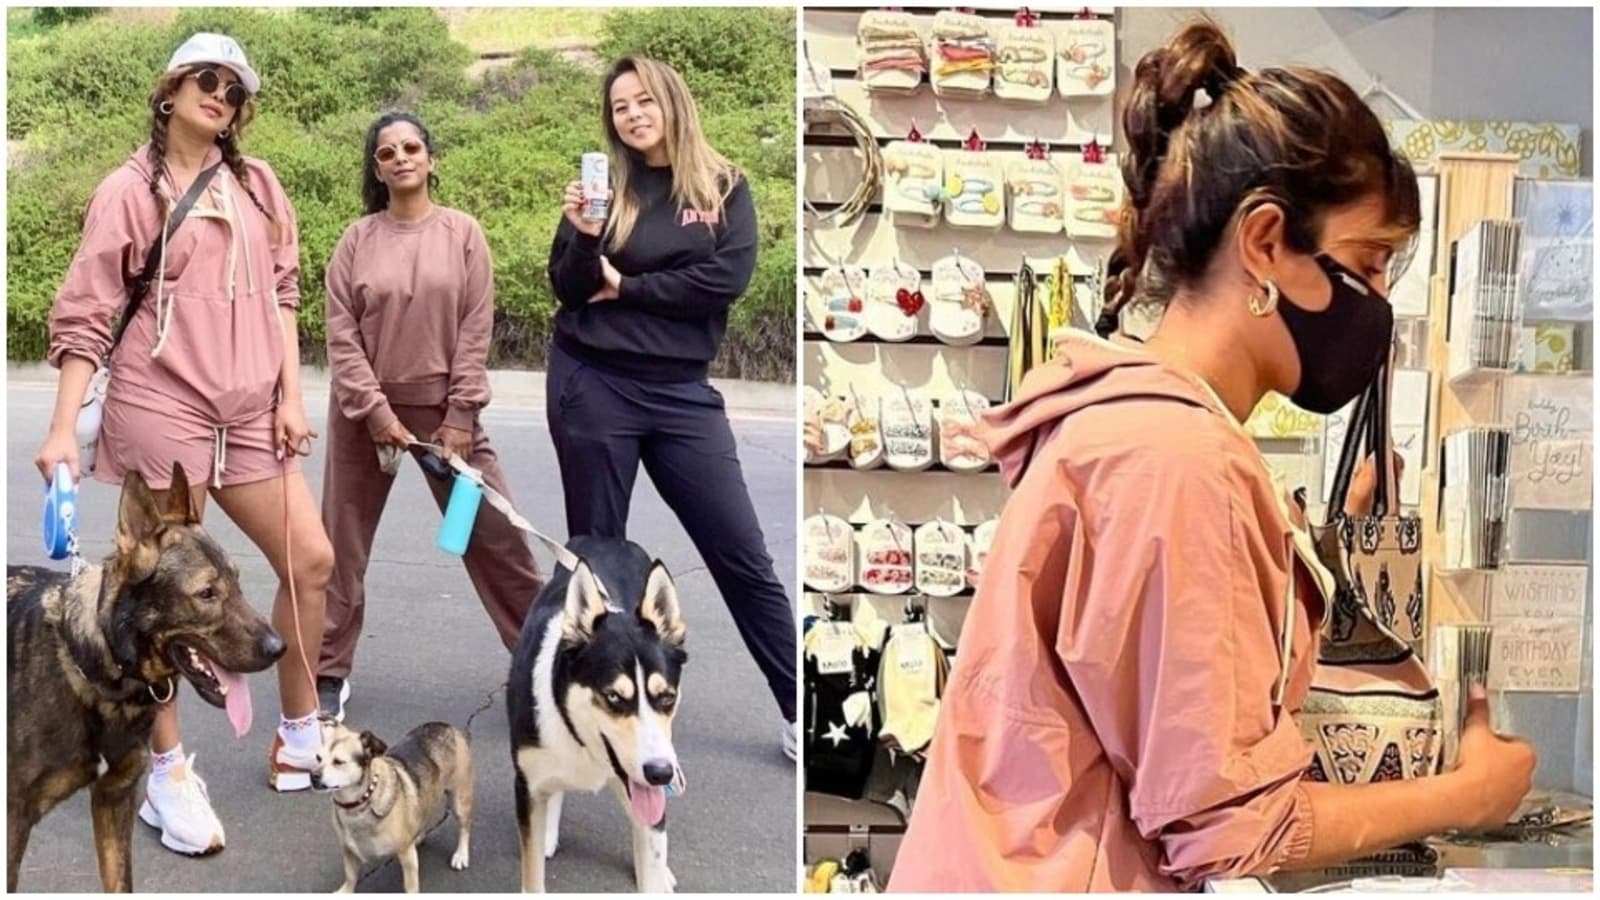 Priyanka Chopra enjoys ‘Sunday with the girls and pups’ in shorts and jacket with pigtails in Los Angeles: See pics